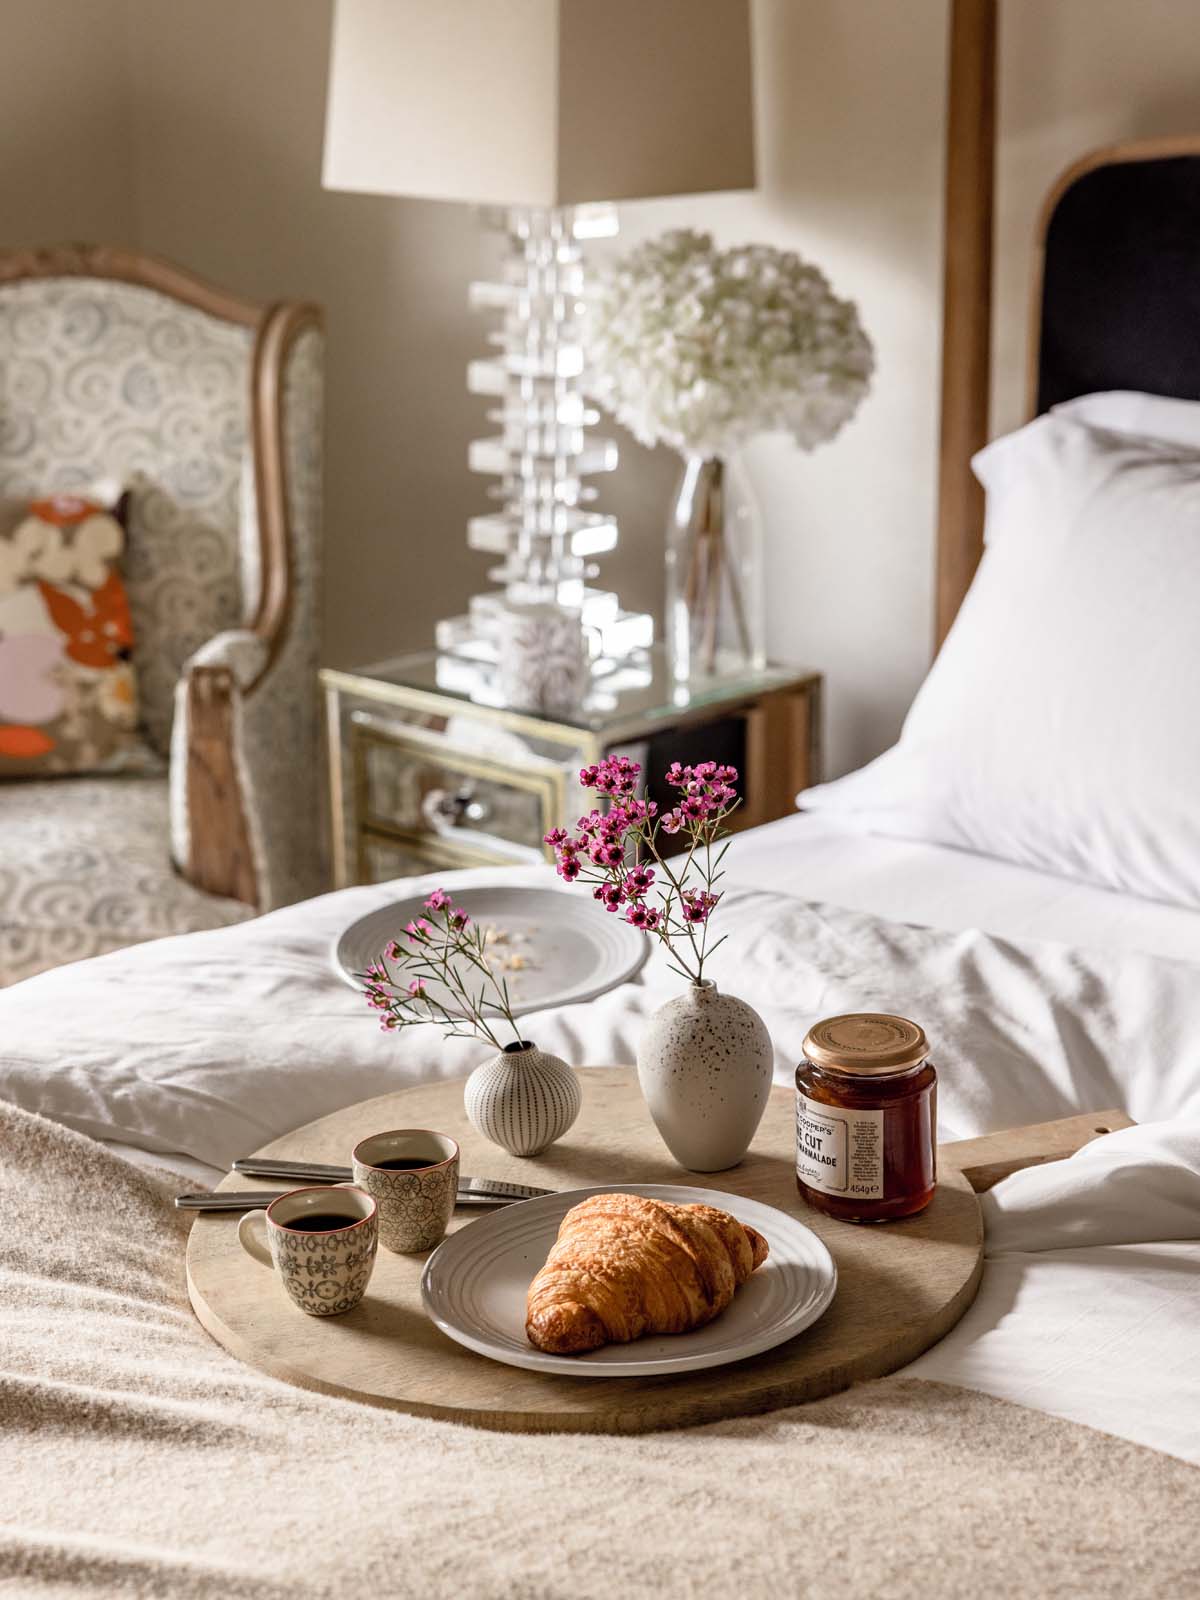 Breakfast tray with croissants and jam in bed